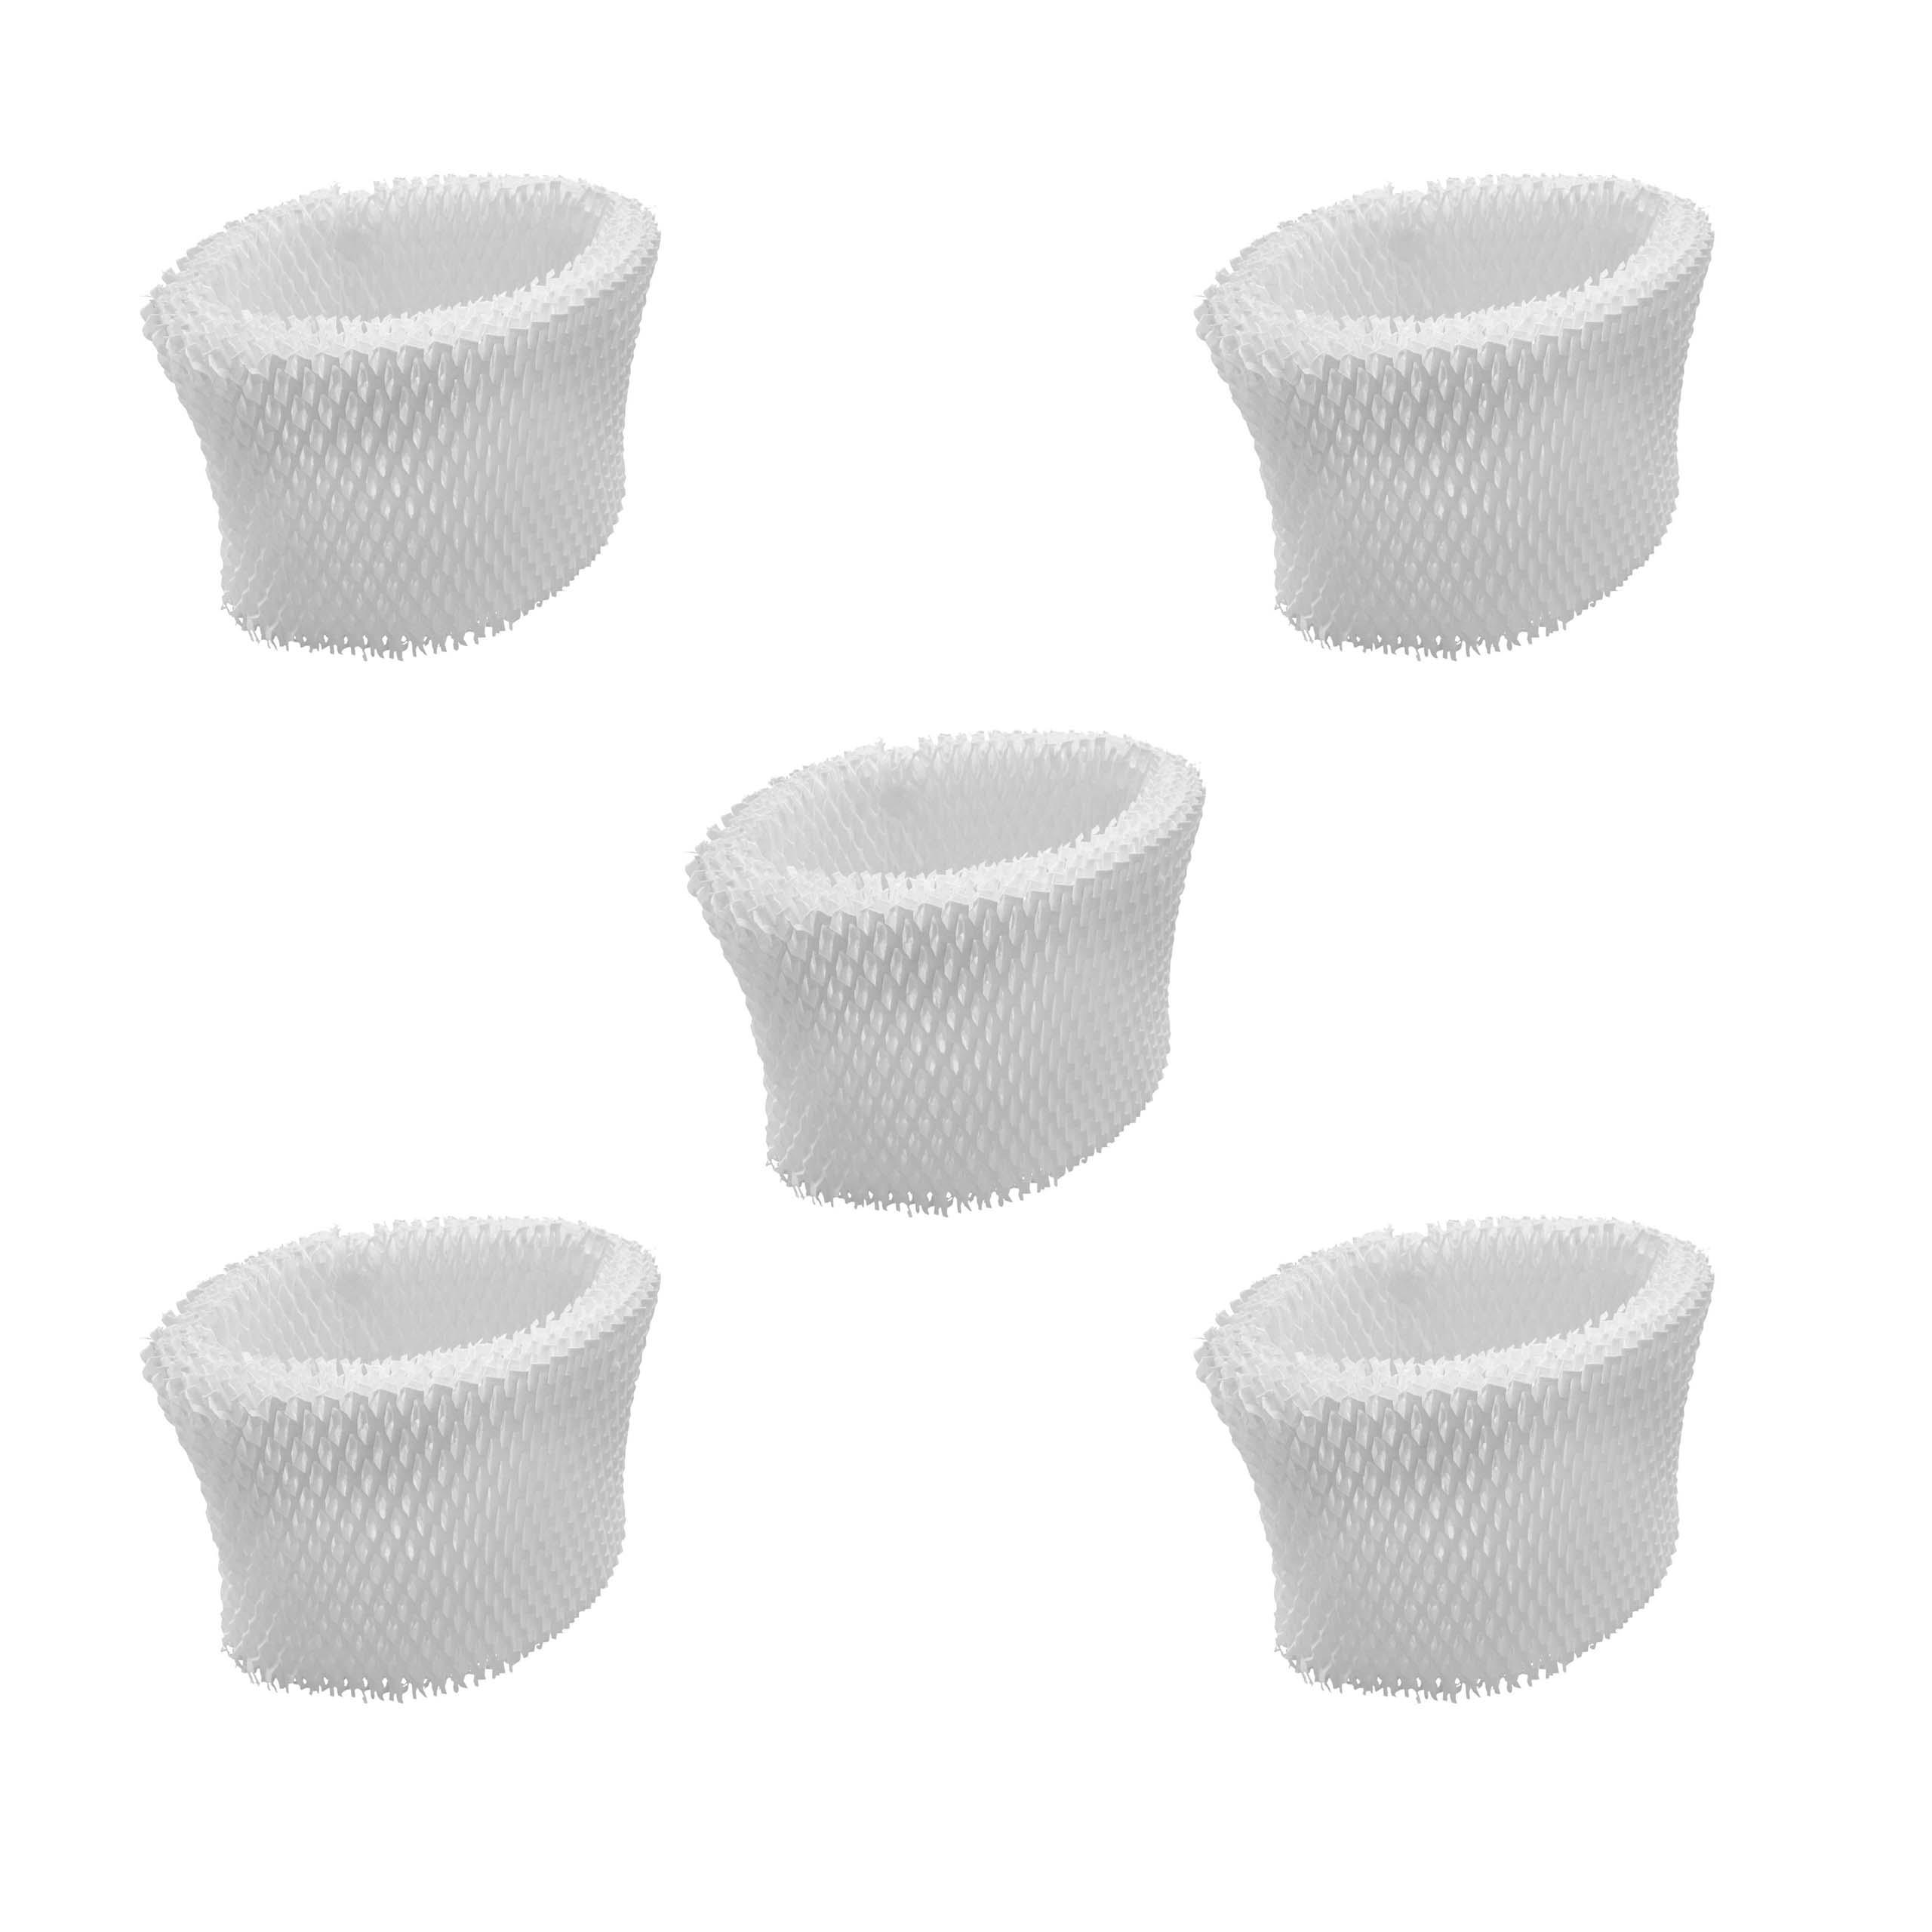 5x Filter replaces Philips HU4102/01, FY2401/10 for Humidifier - paper